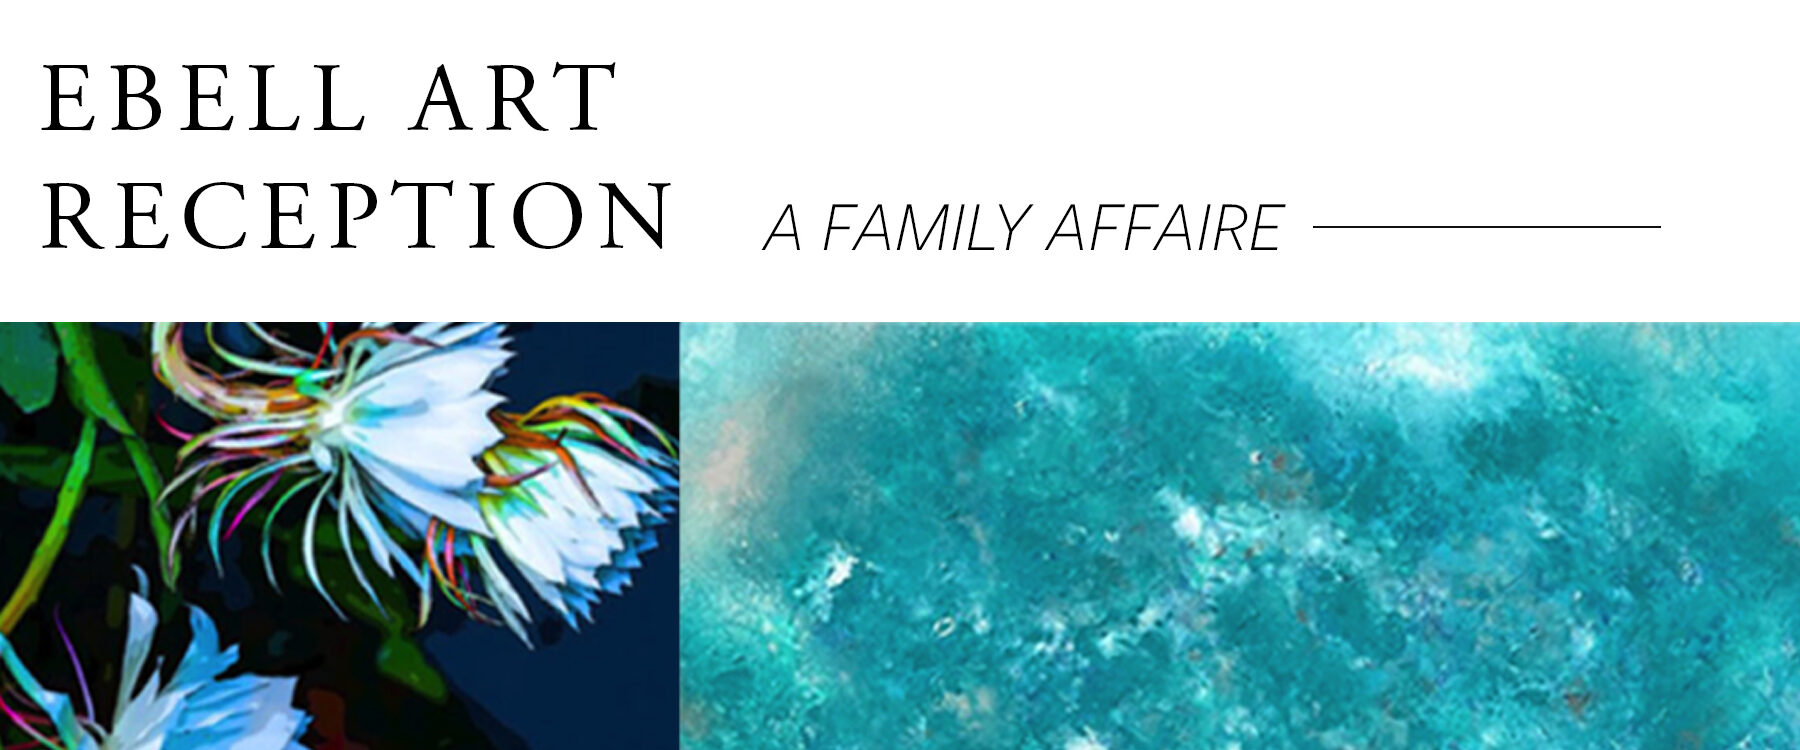 Ebell Art Reception: A Family Affaire